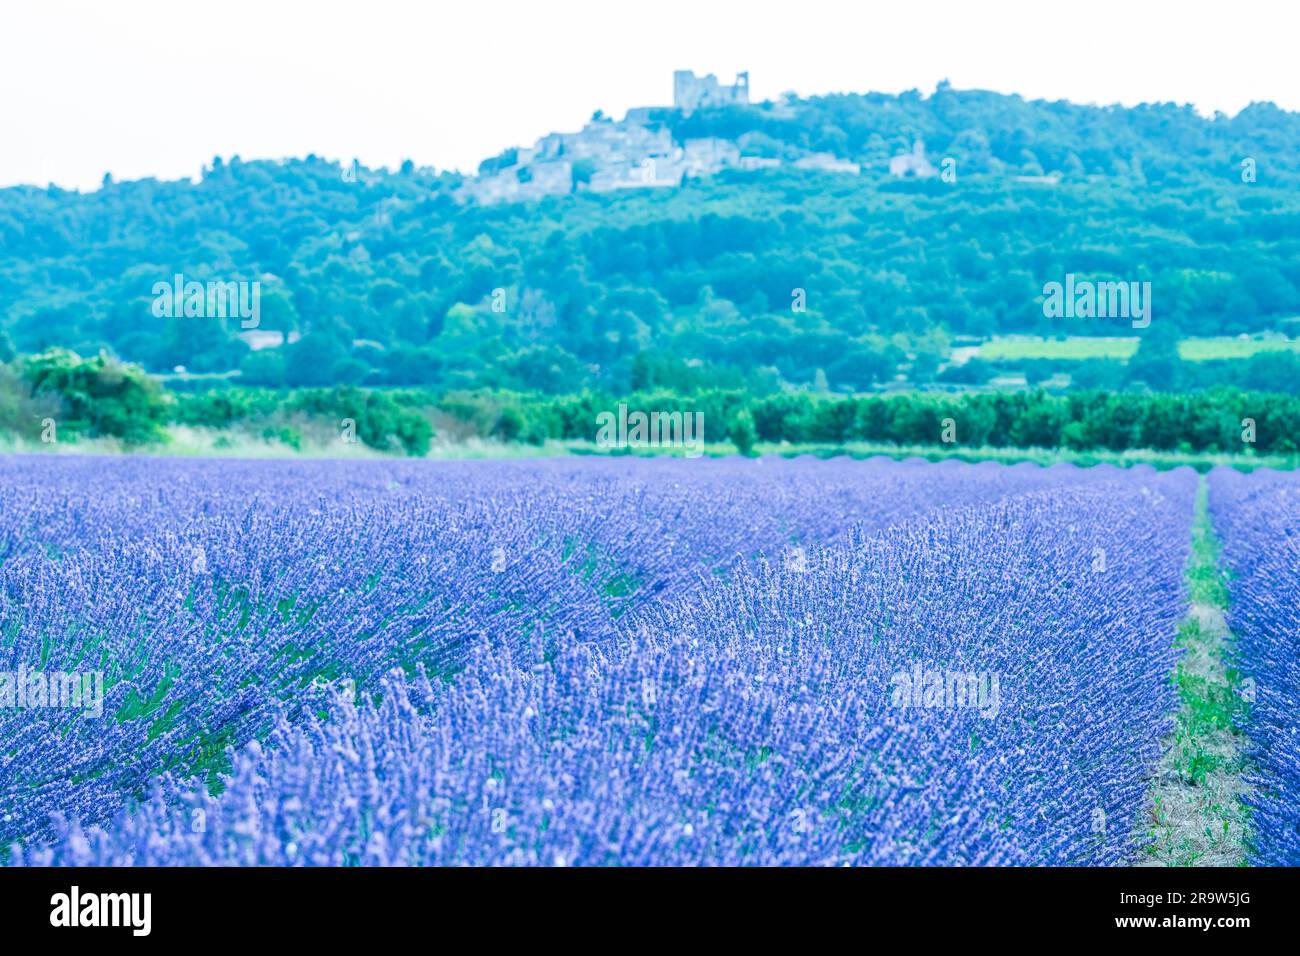 Slud Begrænset etnisk The hill village of Lacoste with lavender field in the foreground Stock  Photo - Alamy